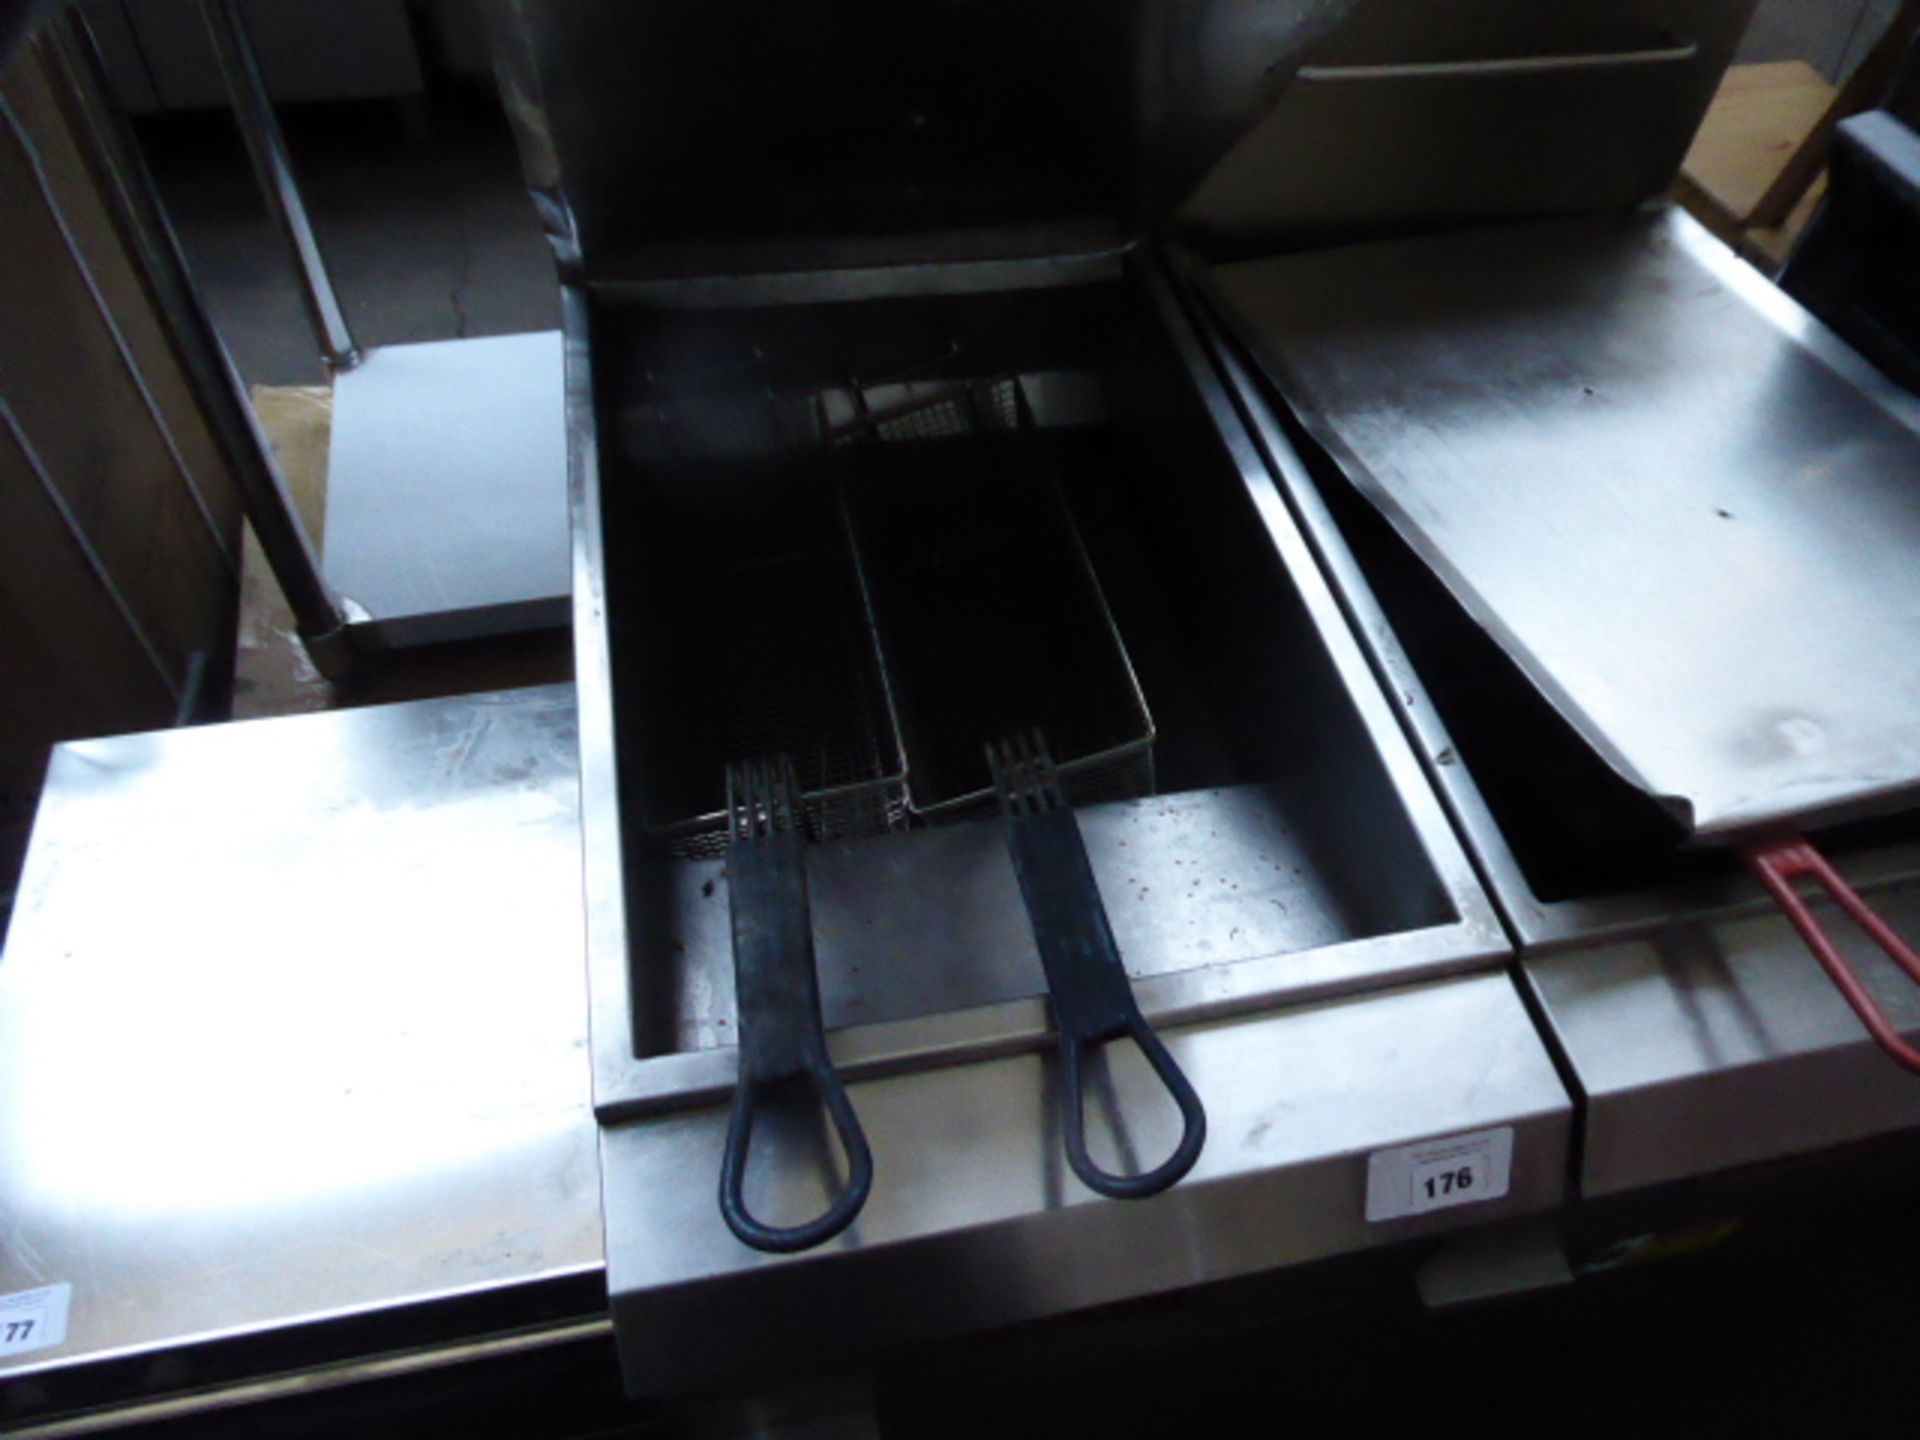 40cm Gas Thor single well fryer with 2 baskets - Image 2 of 2